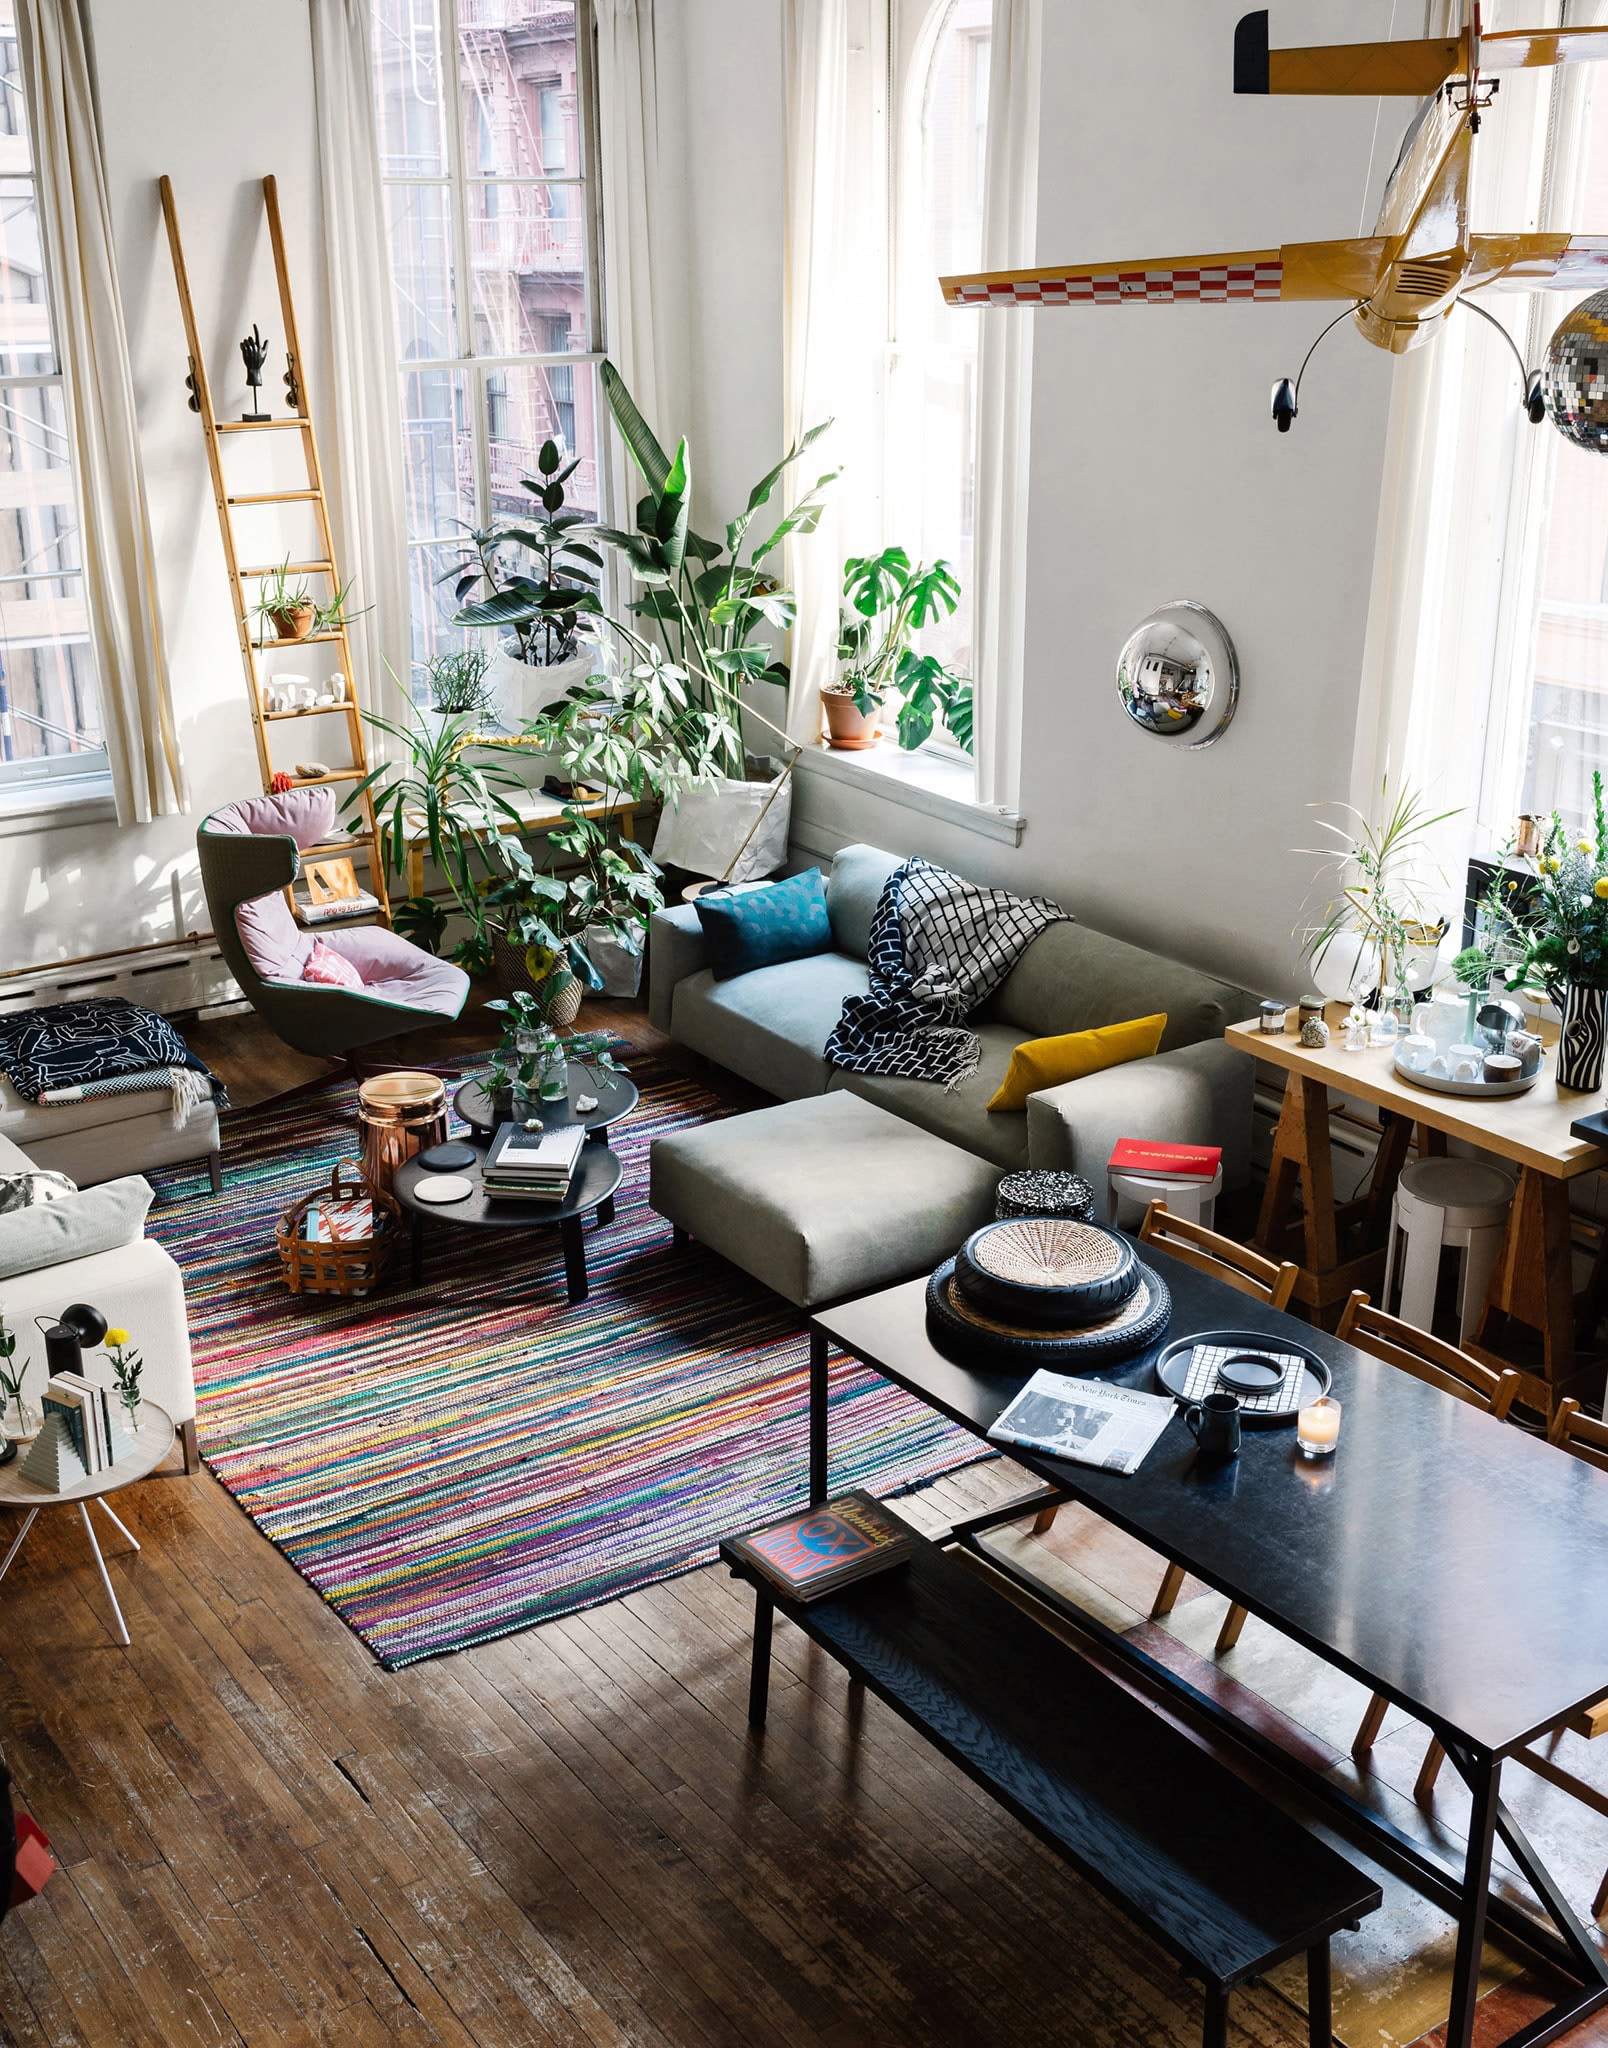 Welcome to Tribeca: At home with Creative Director PieterJan Mattan